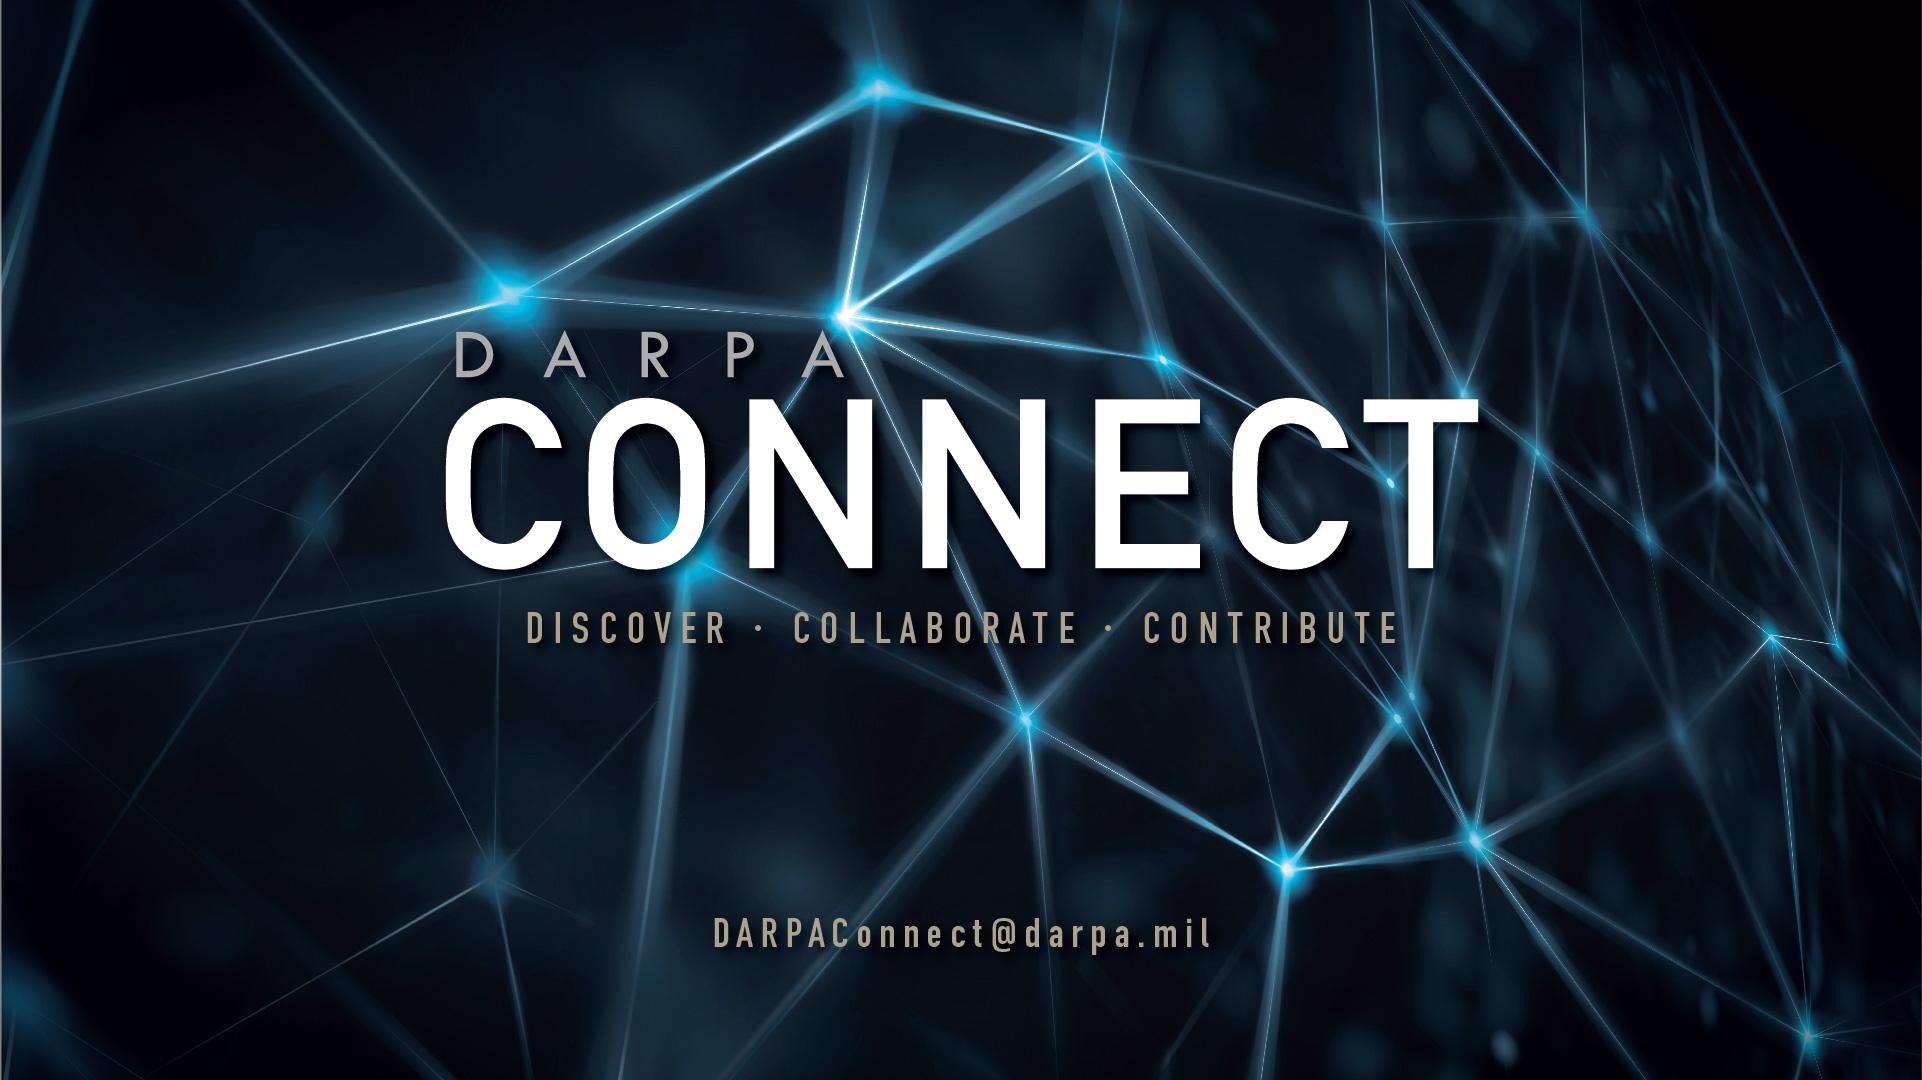 DARPA Connect